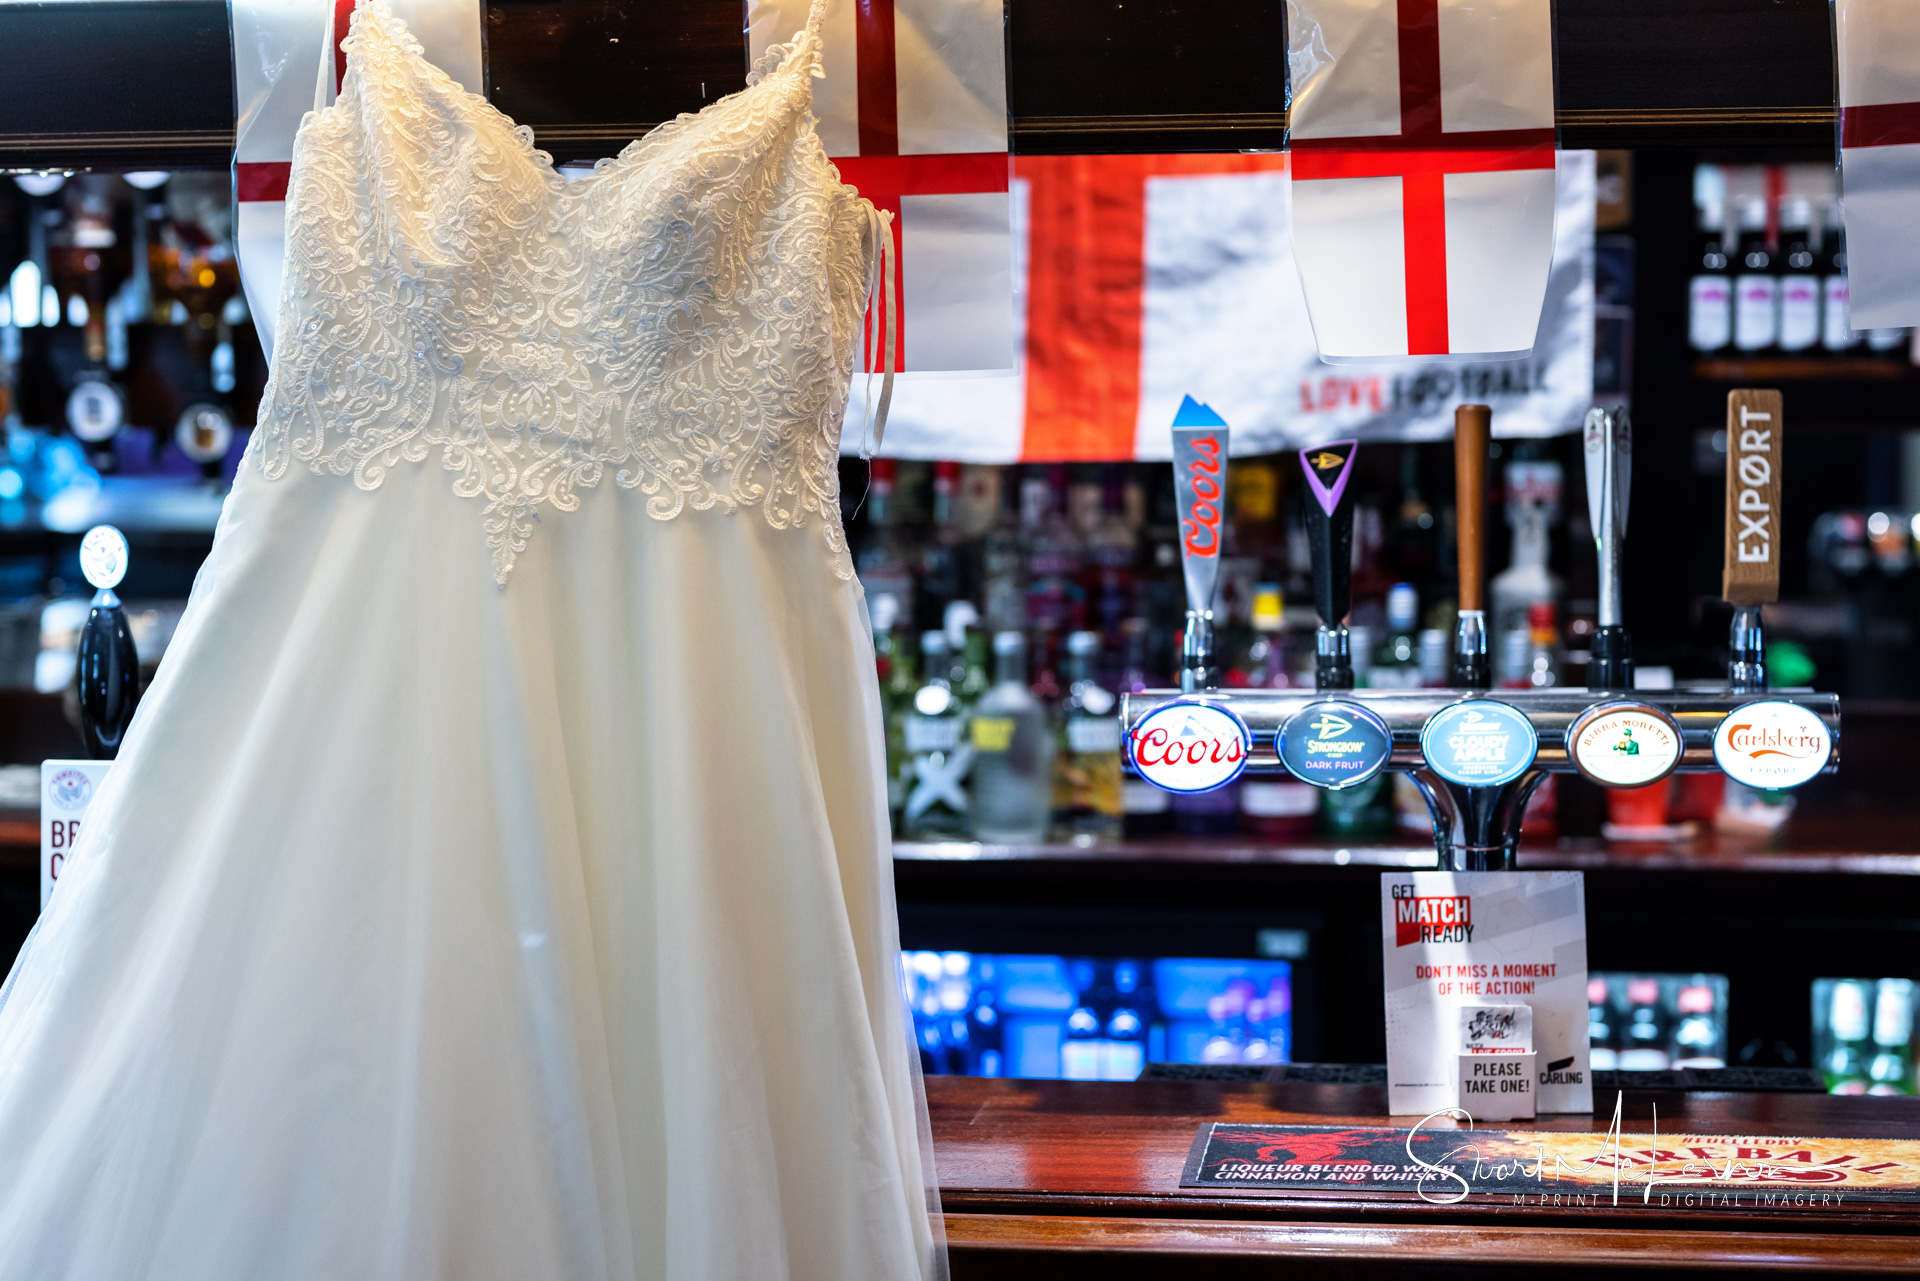 The Bride's dress in front of the bar